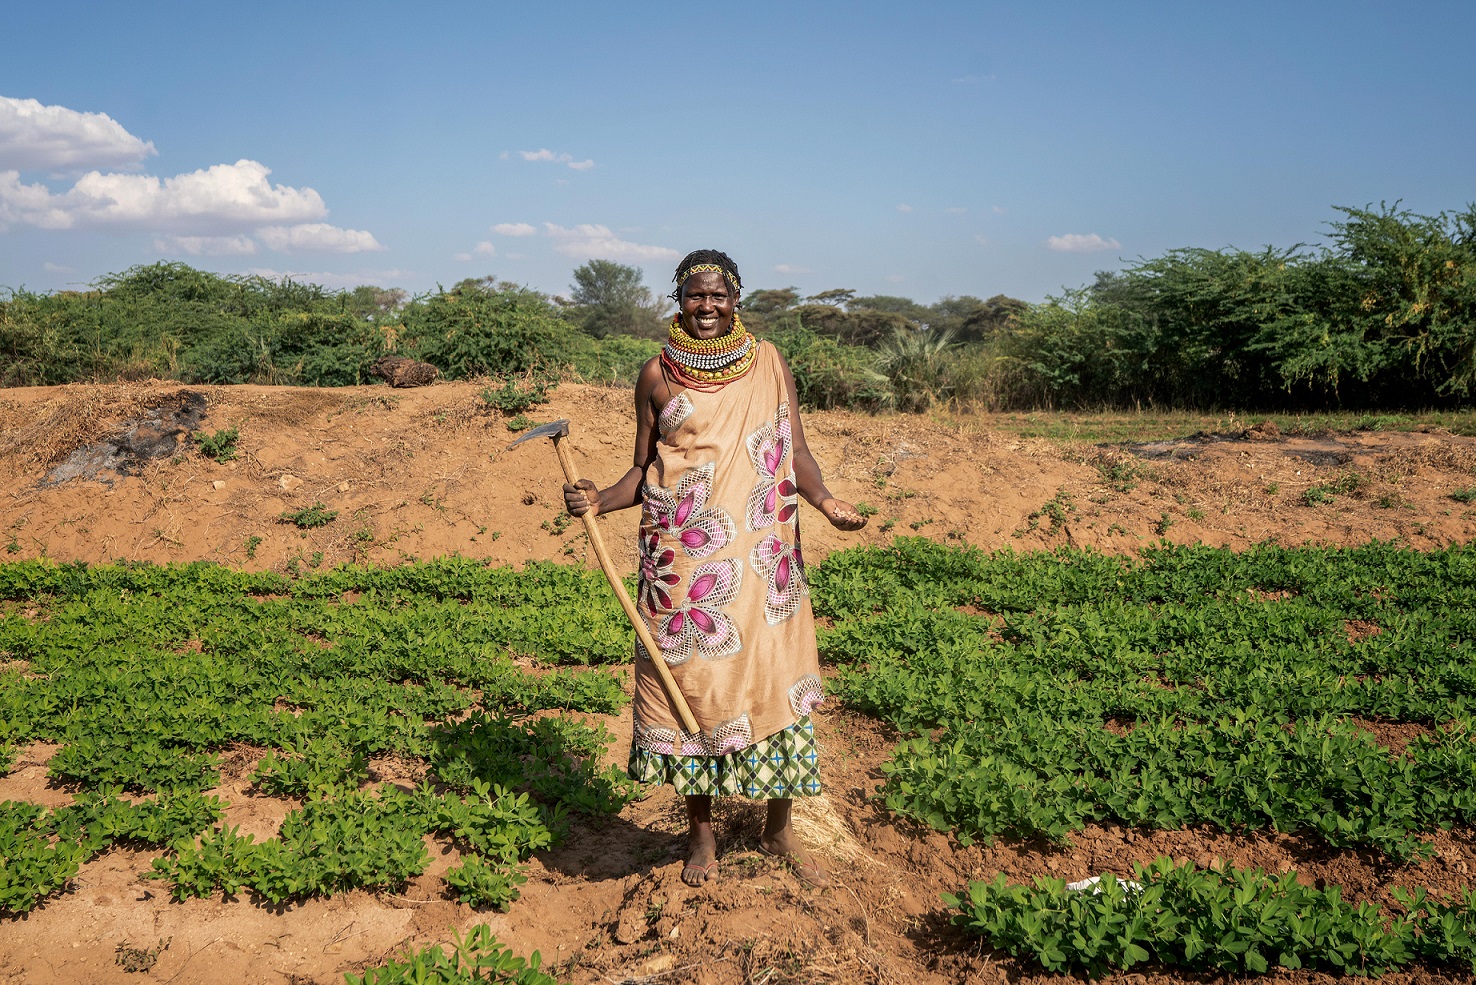 A female farmer stands in a field holding a farming tool